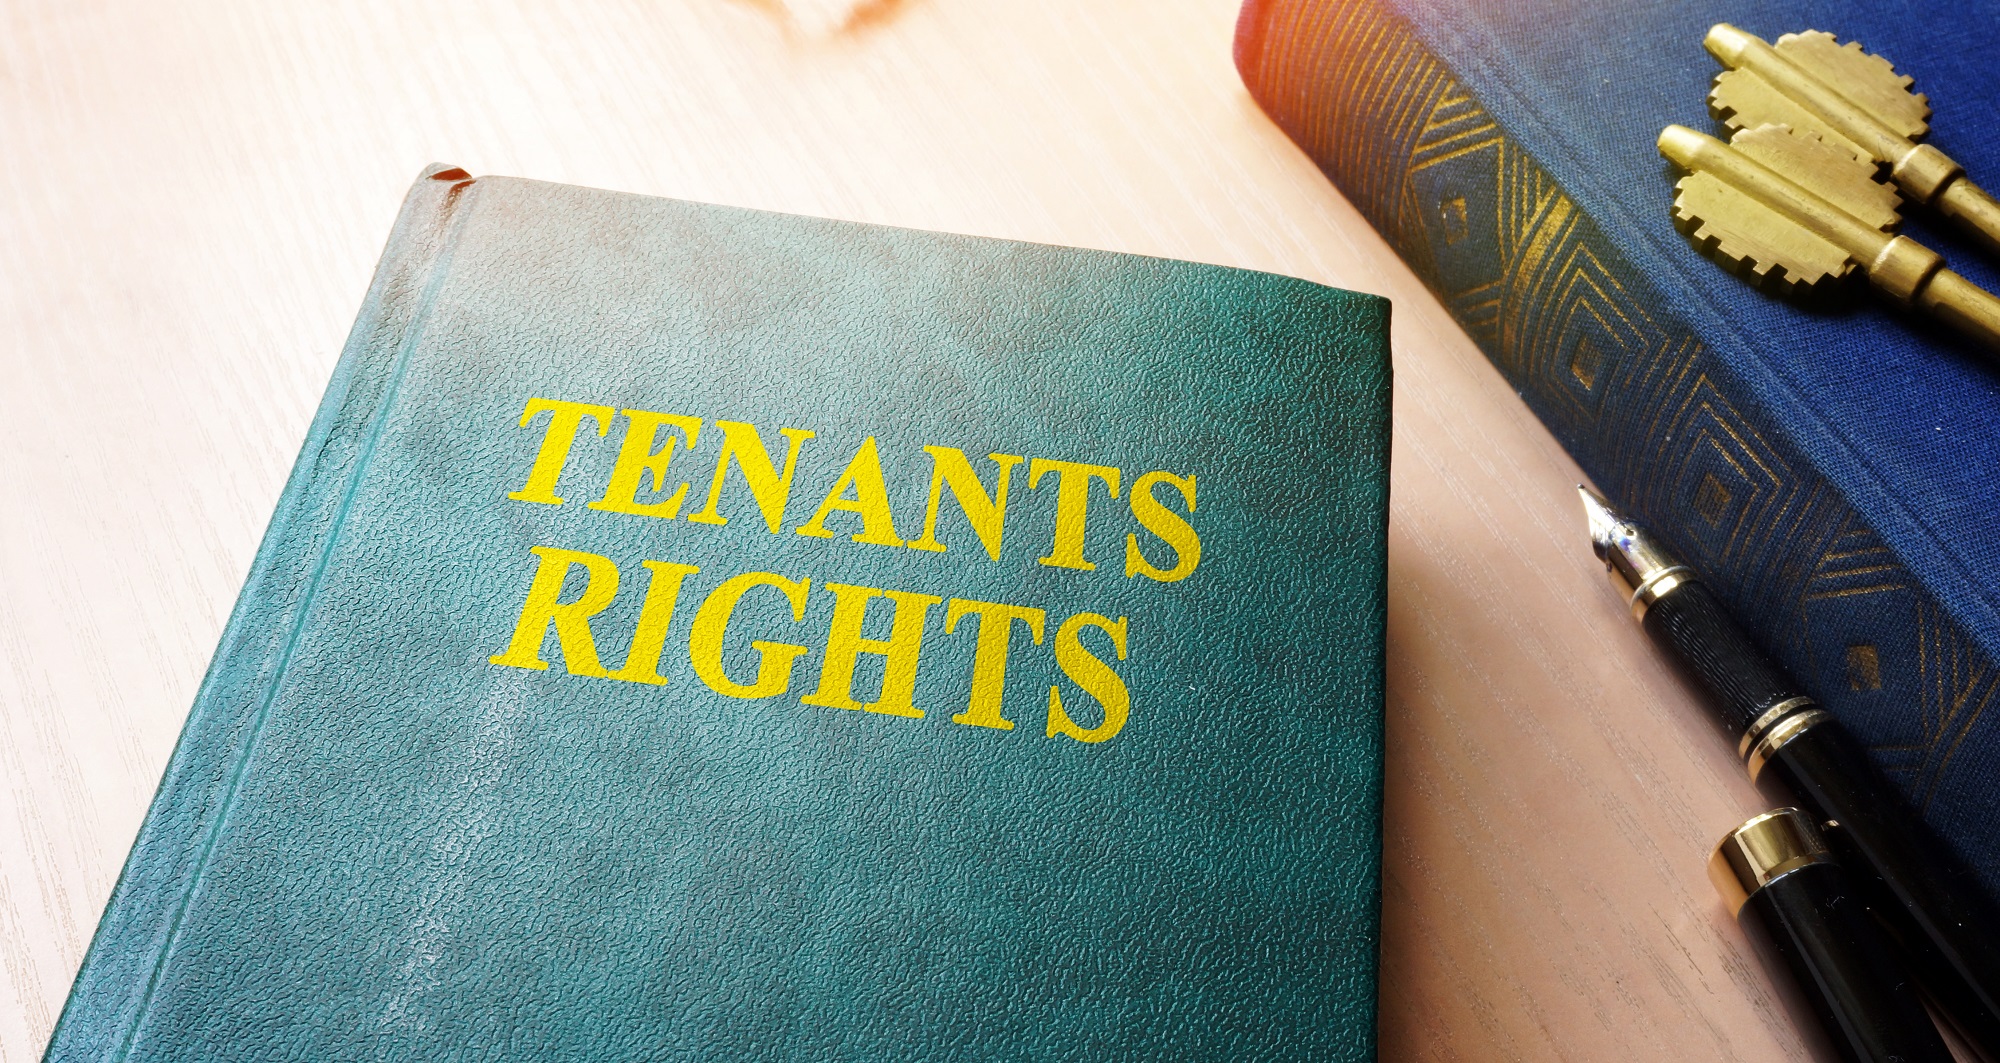 Tenants' rights: A complete list